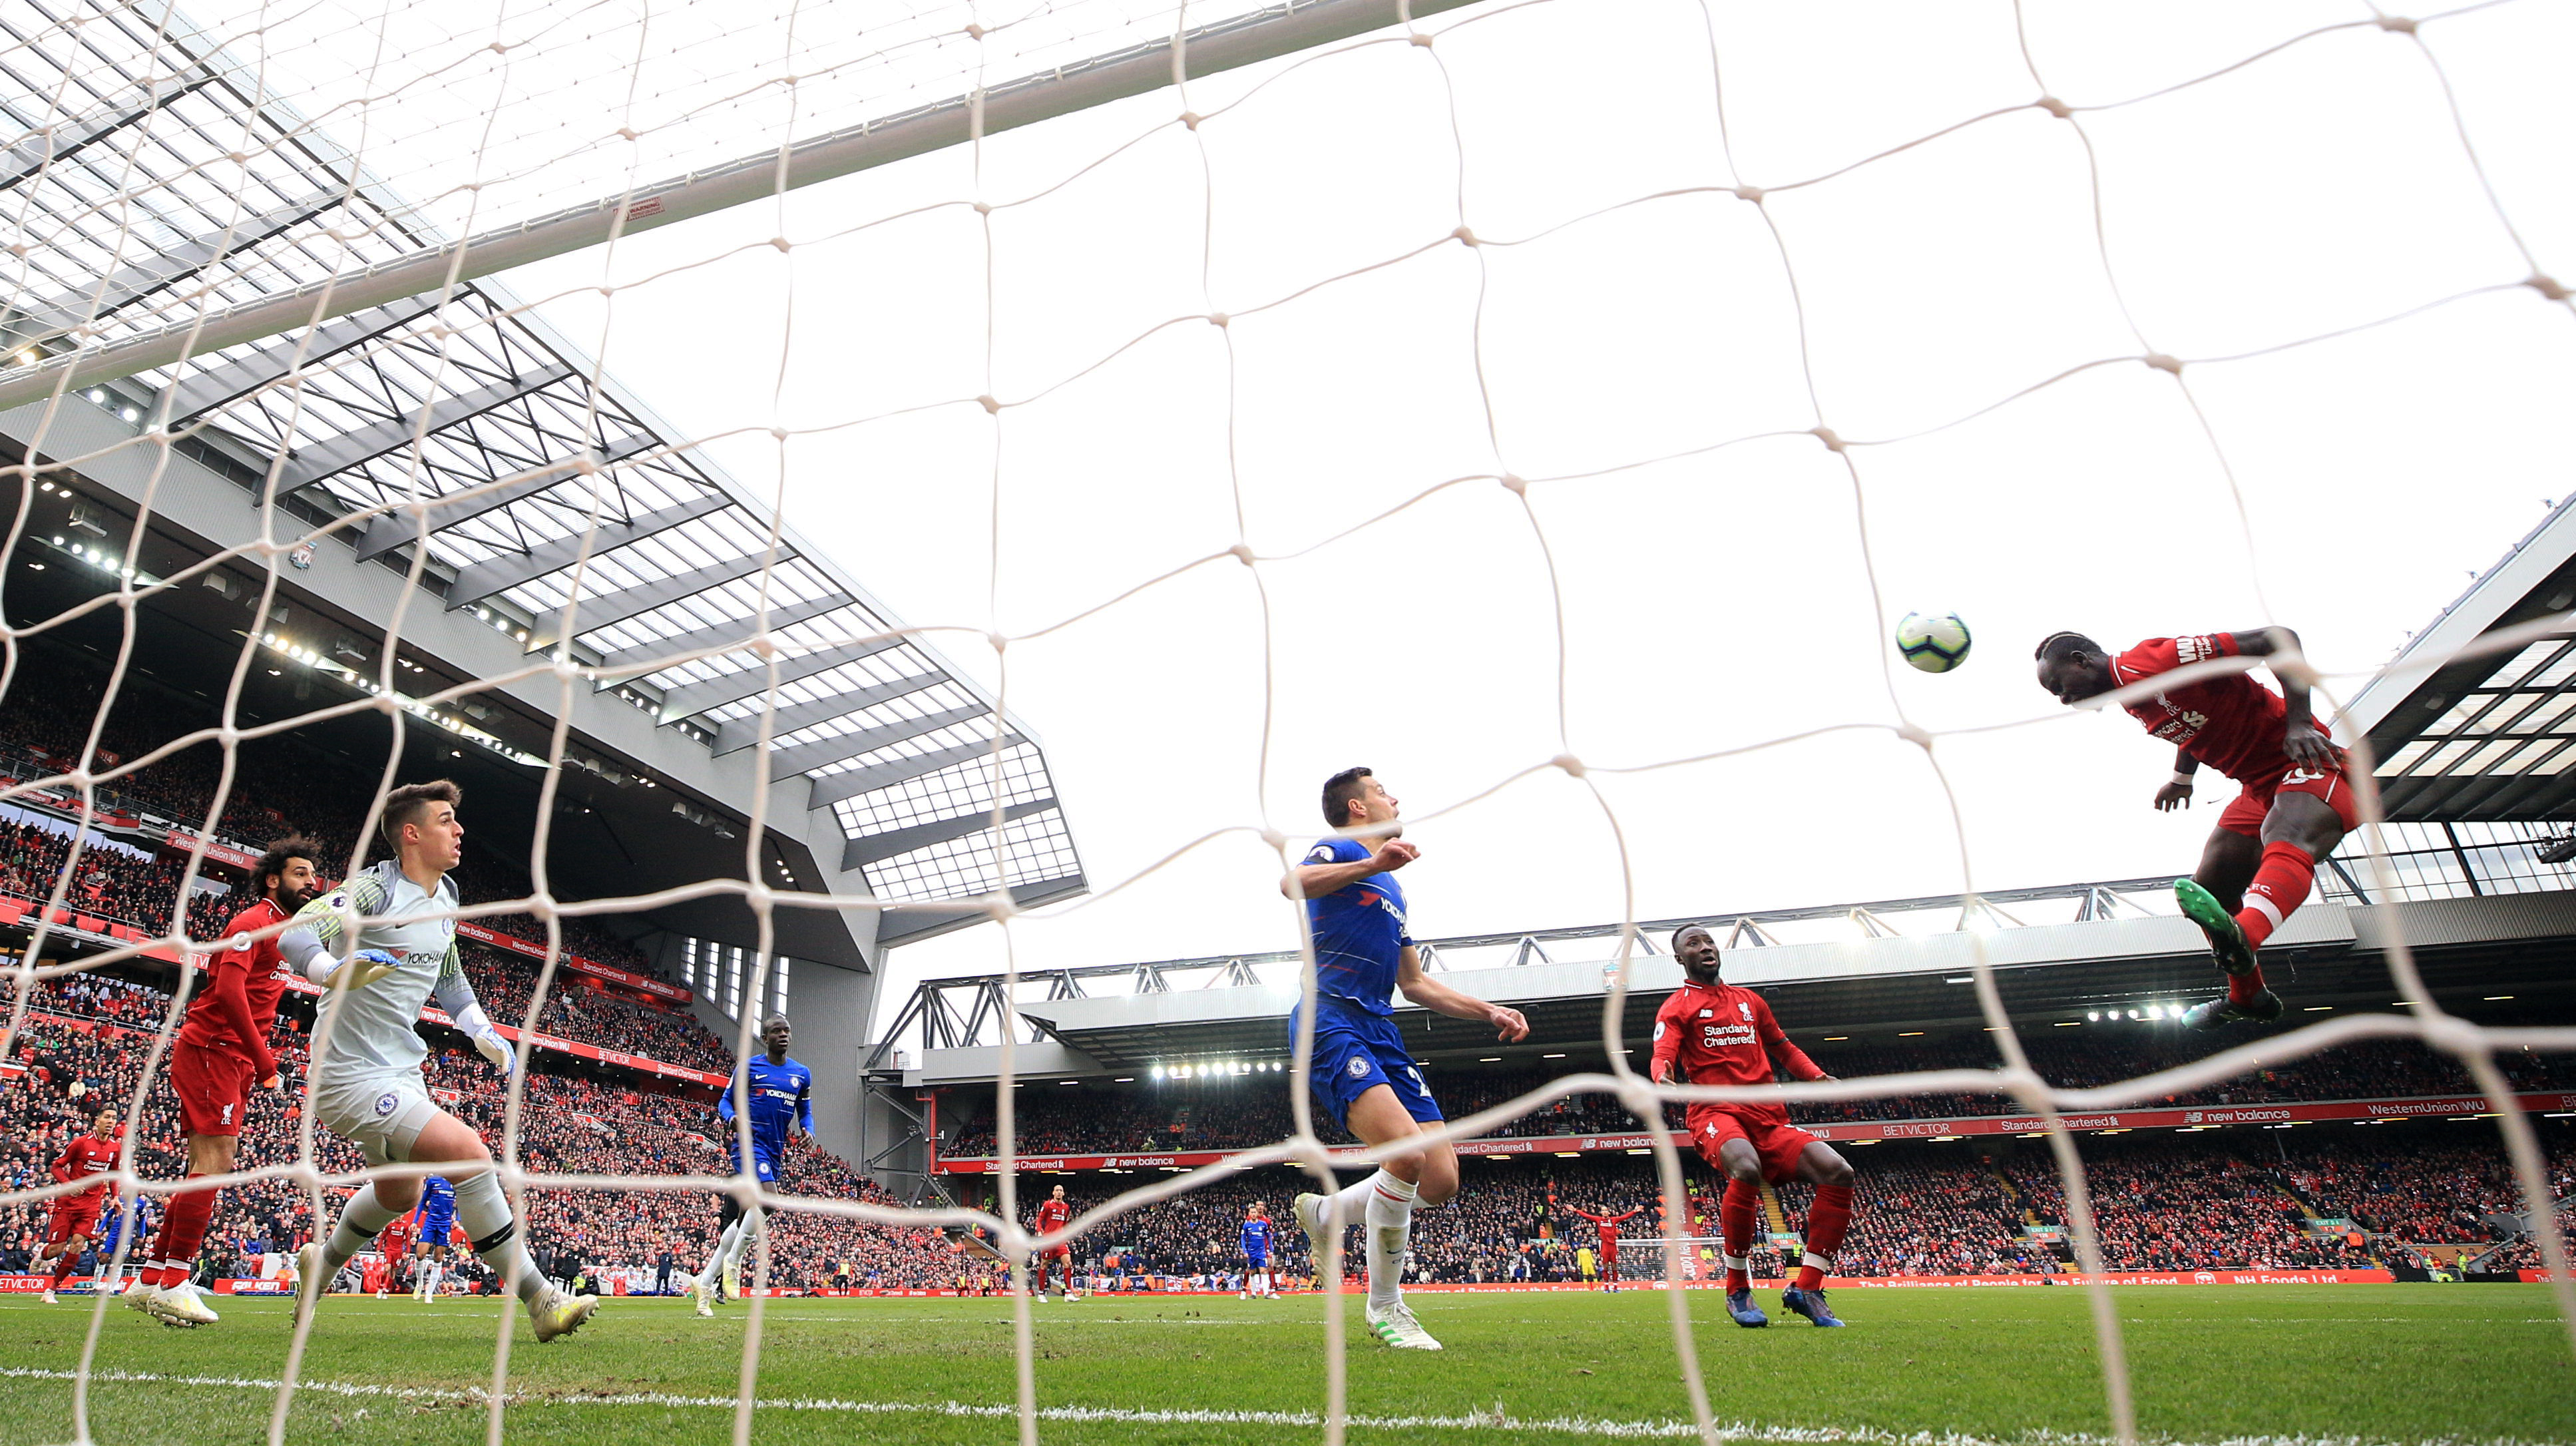 Liverpool's Sadio Mane (right) scores his side's first goal of the game during the Premier League match against Chelsea at Anfield, Liverpool